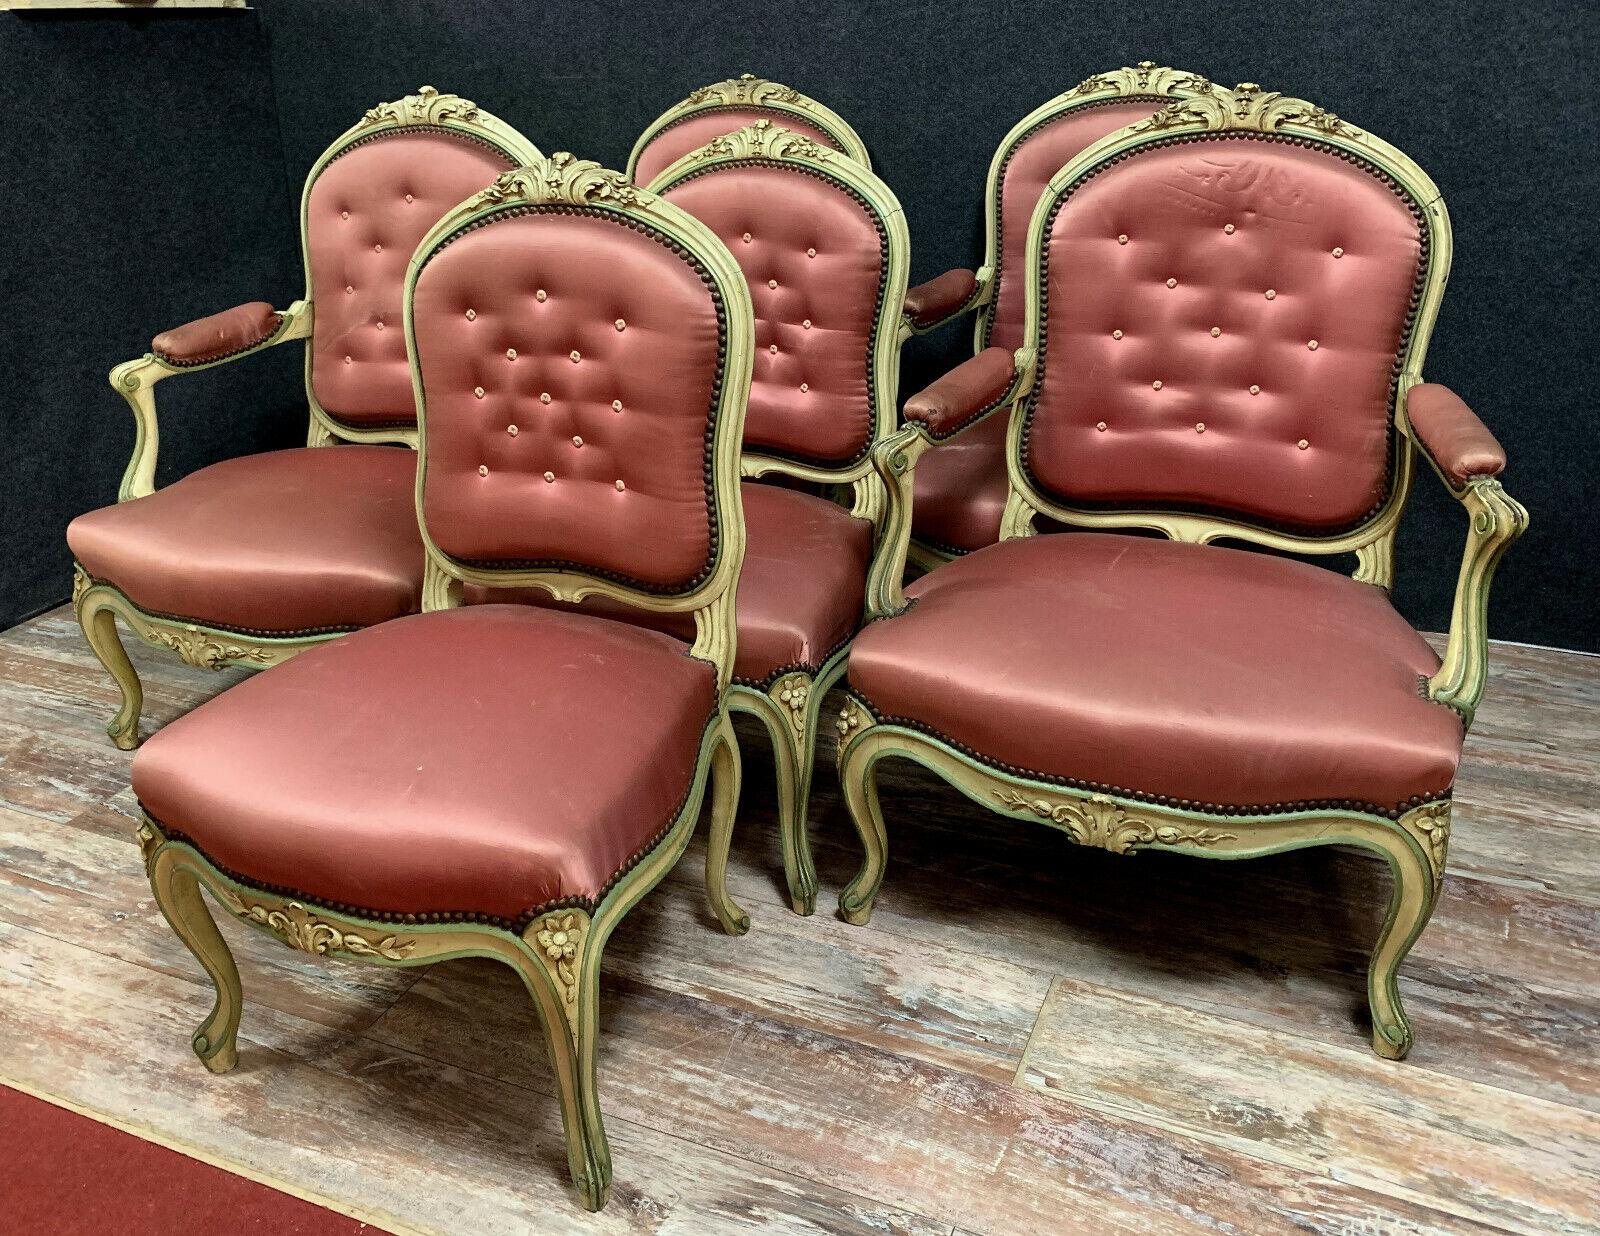 Louis XV Lacquered Wood Salon Furniture Set with 4 Armchairs and 2 Chairs -1X01 2